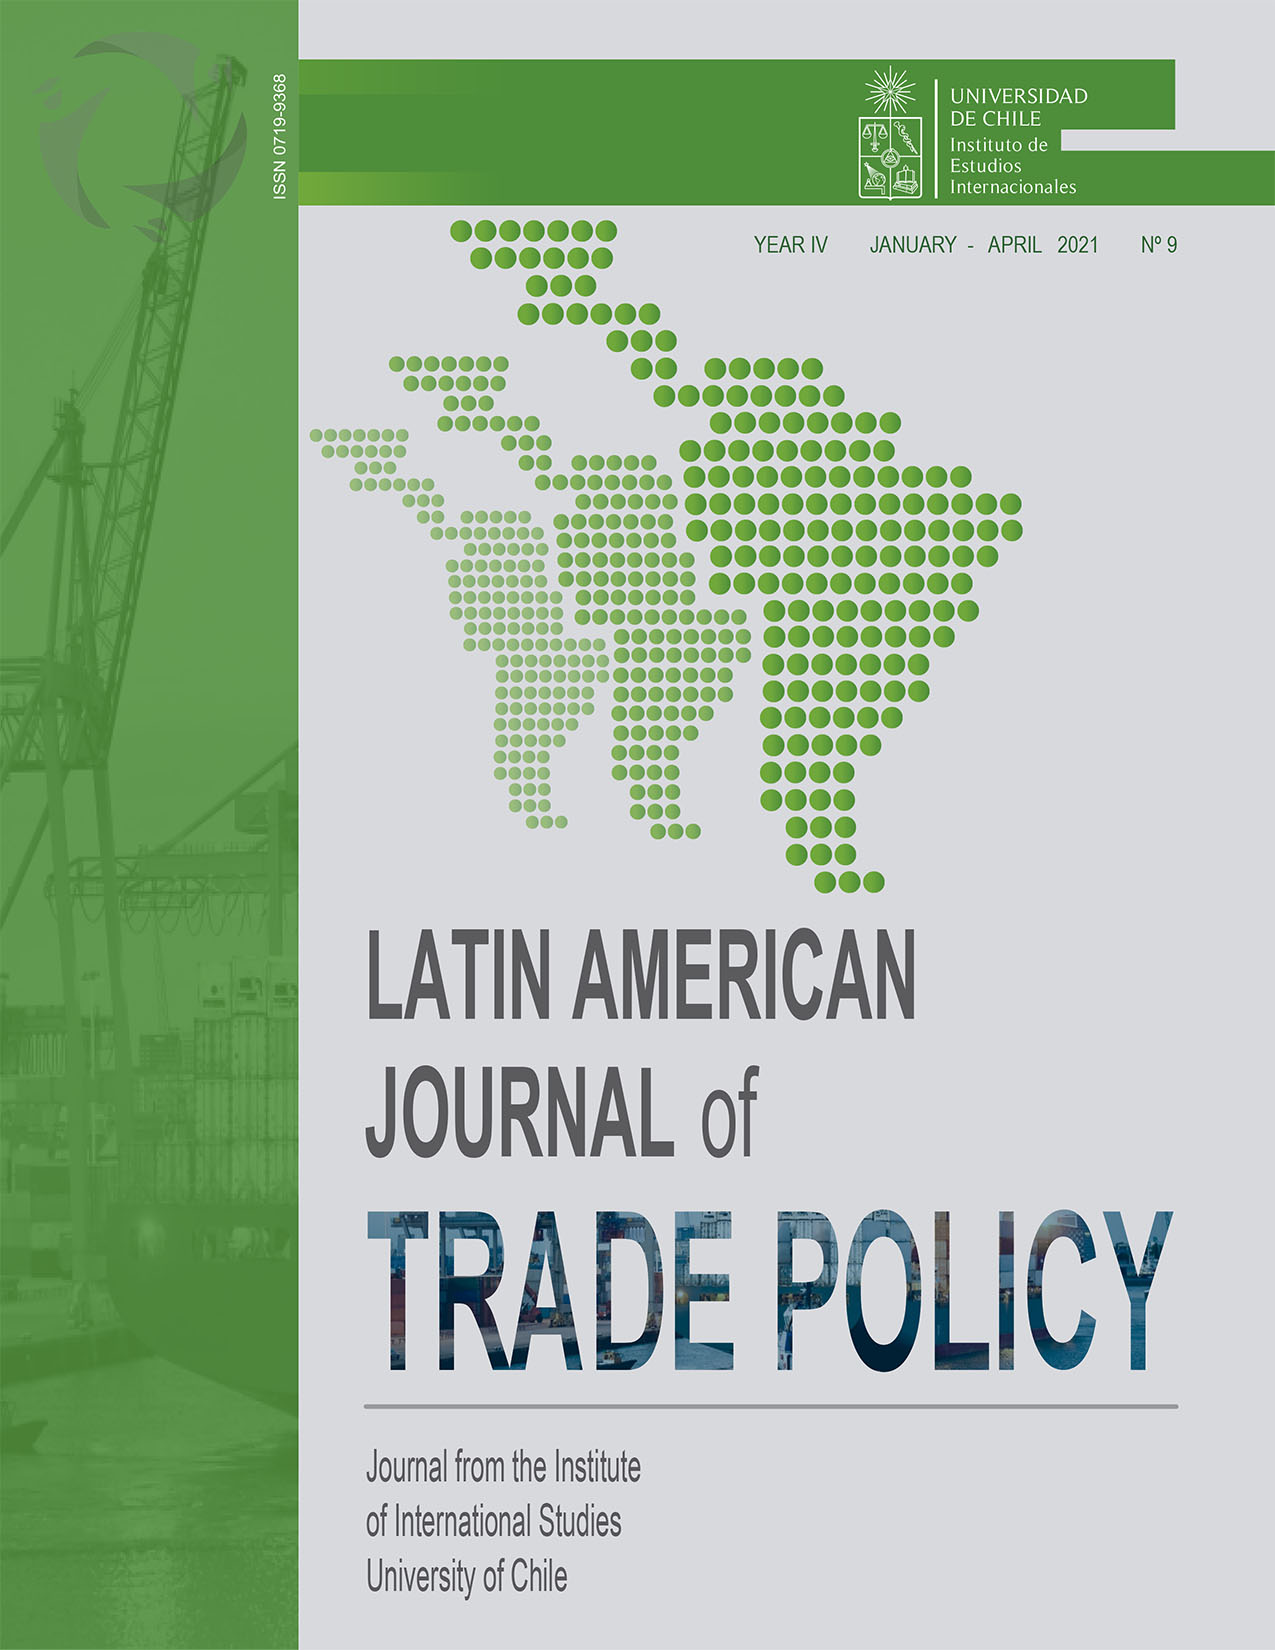 							Ver Vol. 4 Núm. 9 (2021): Latin American Journal of Trade Policy
						